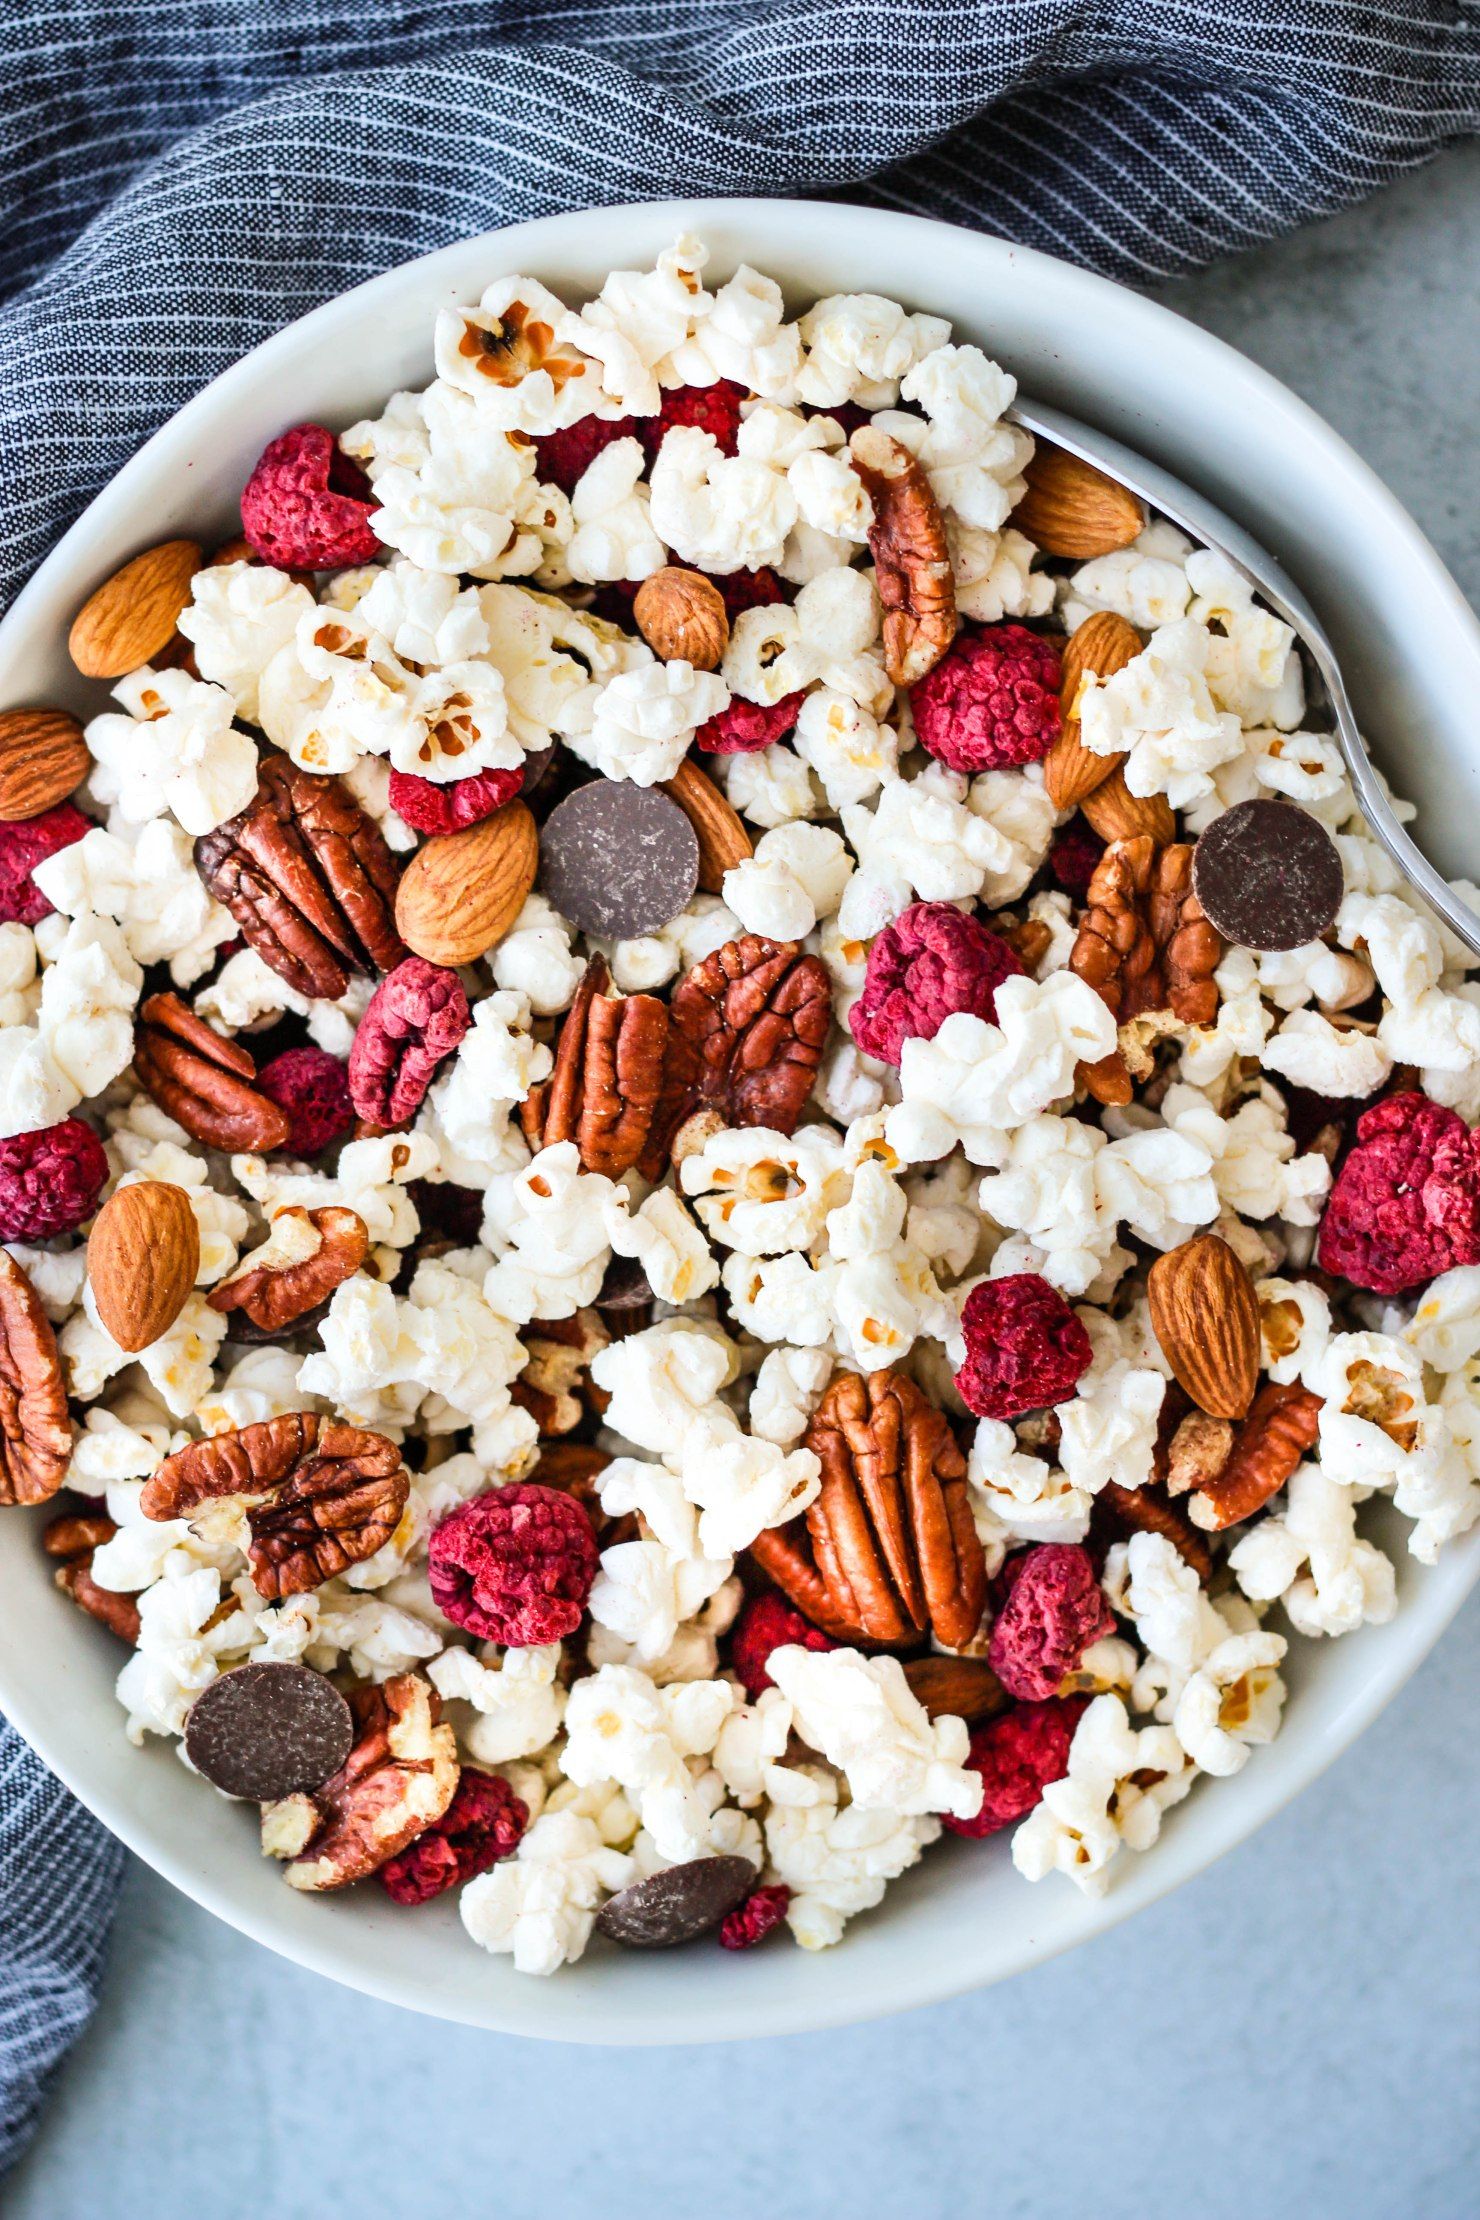 Best Healthy Trail Mixes - Is Trail Mix Healthy?